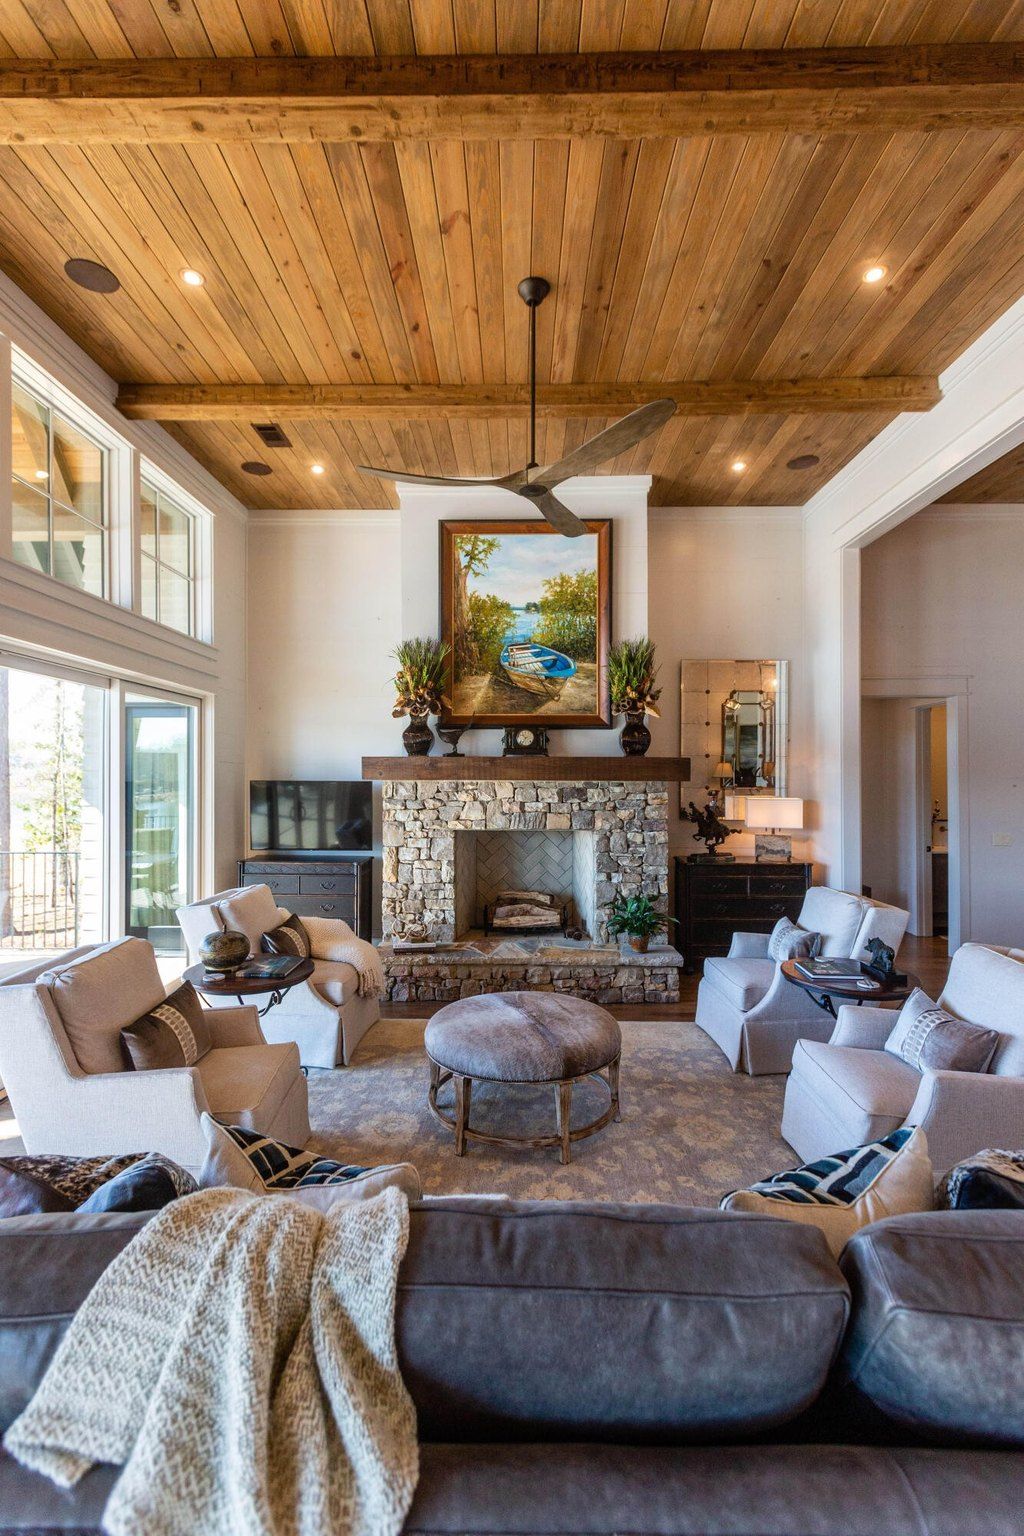 Architectural marvel experience ultimate lake living in this alabama gem by mitch ginn 71